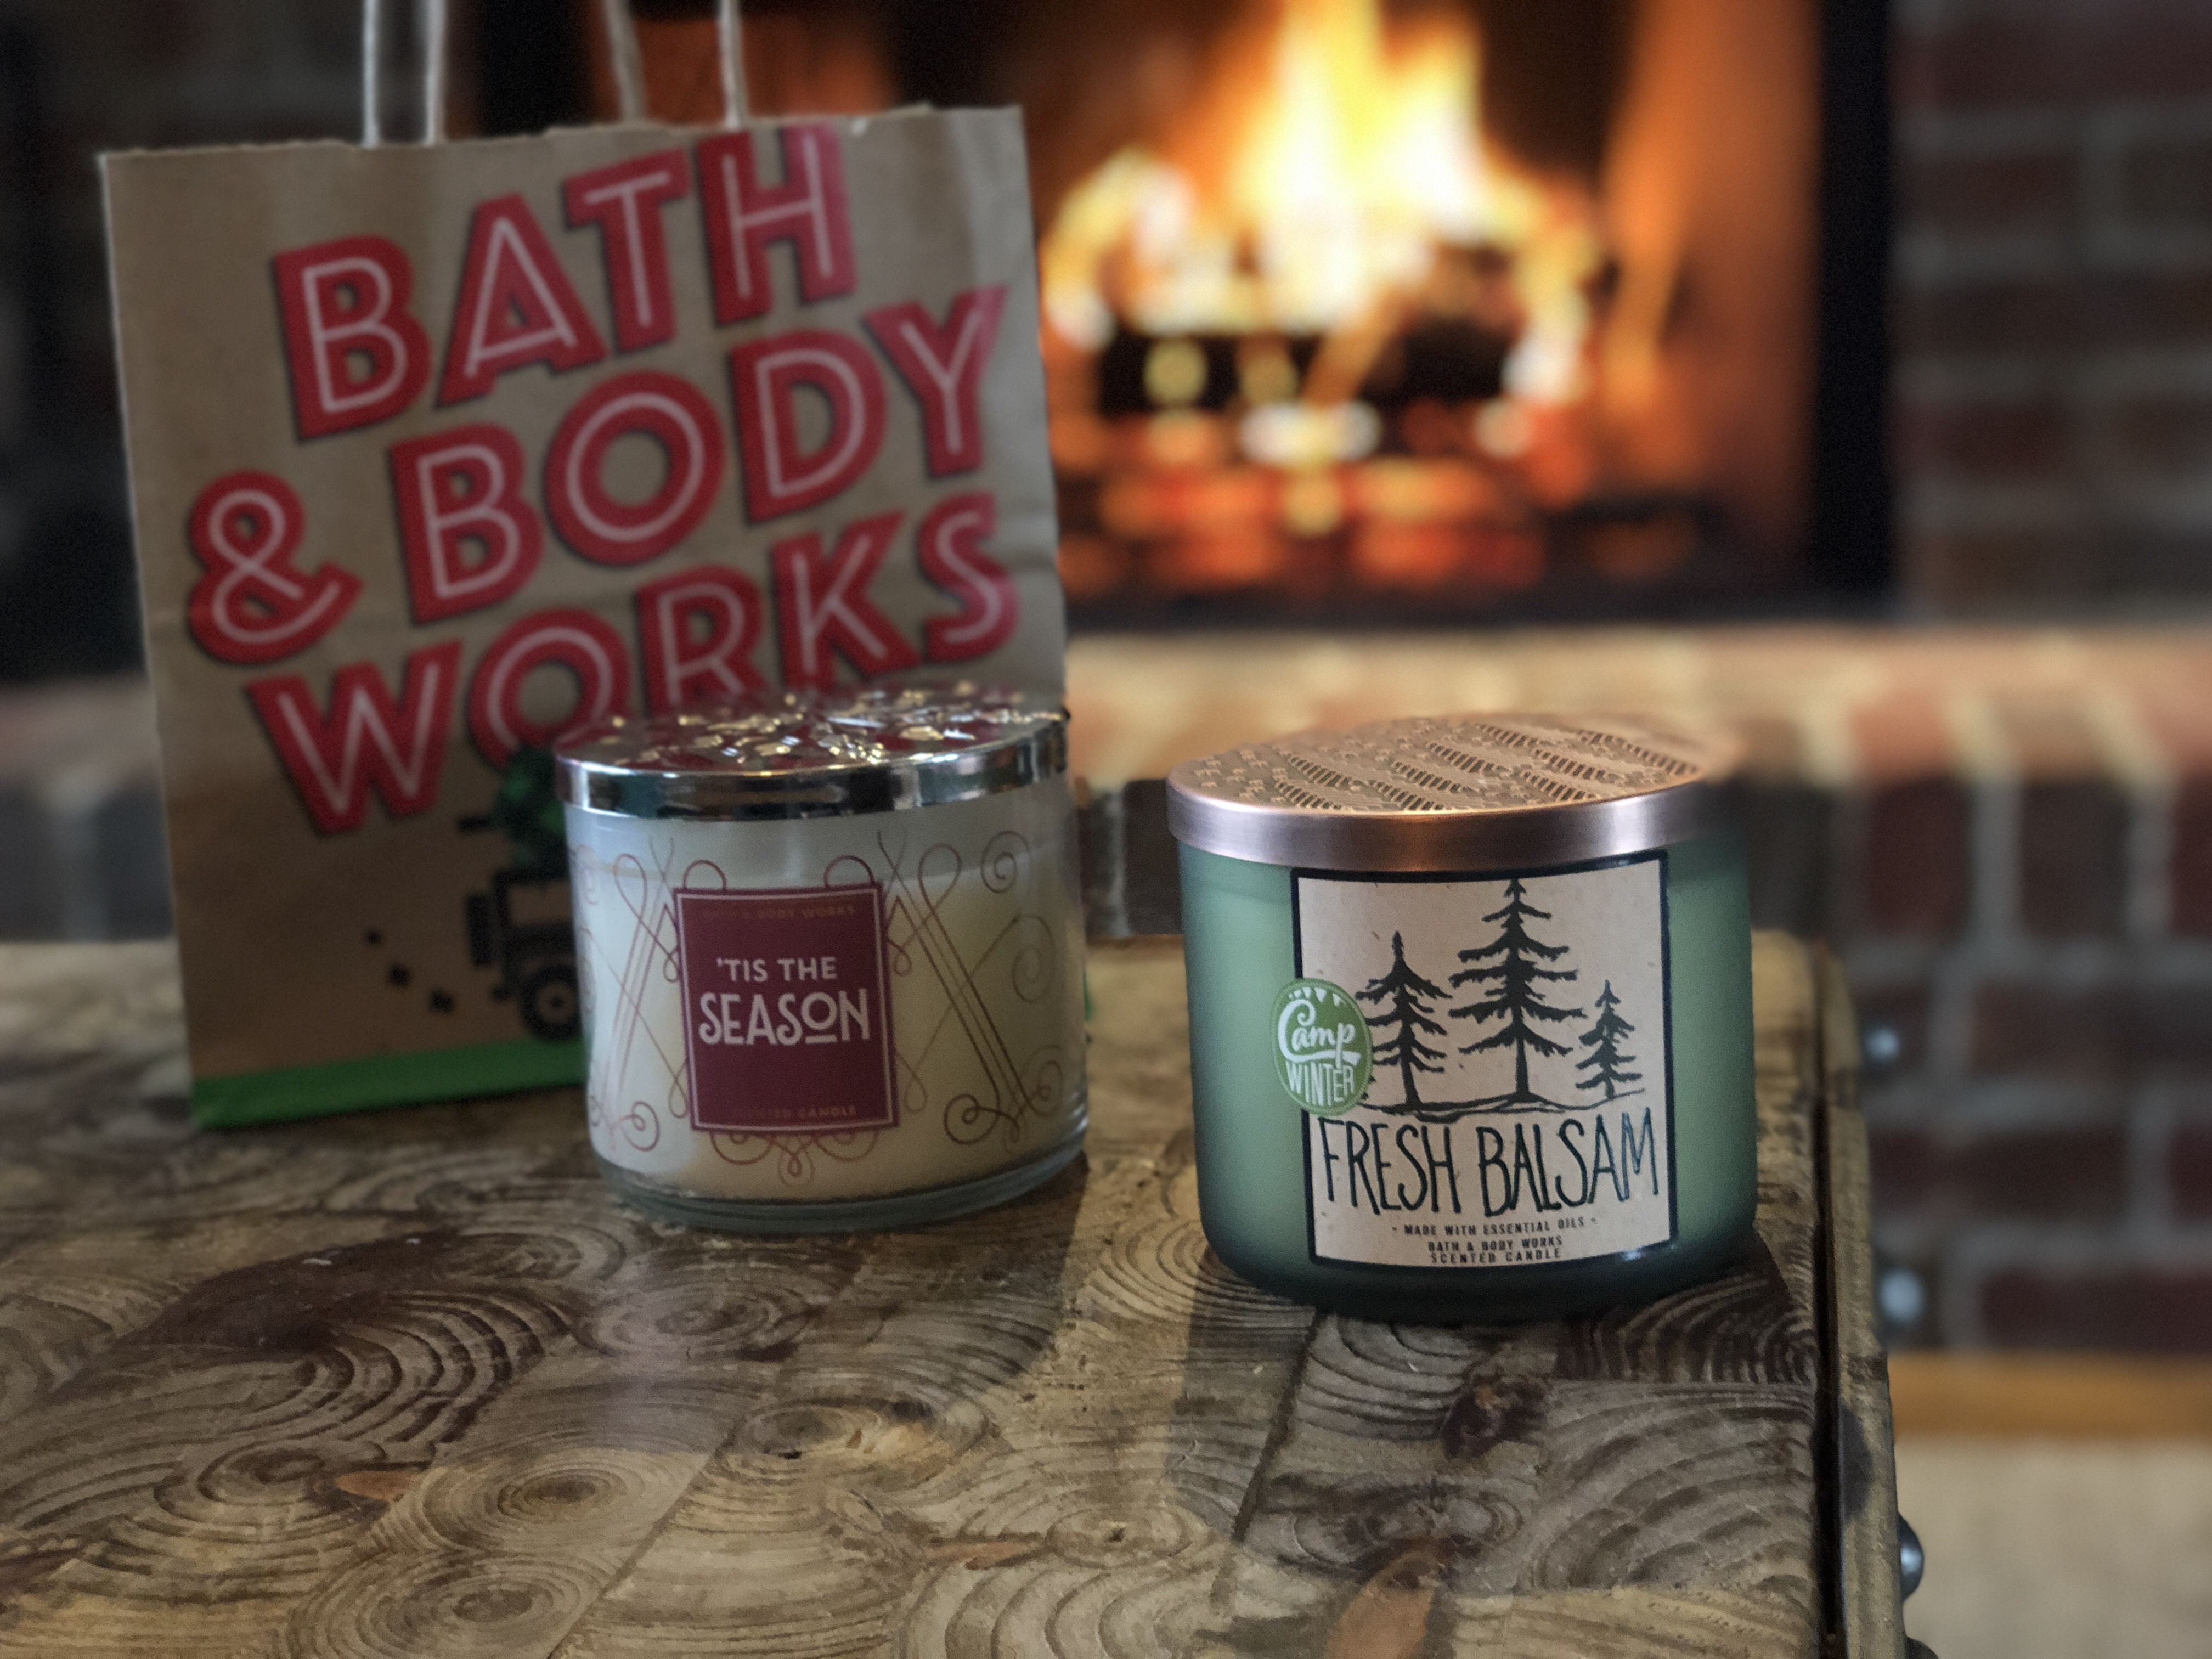 16 secrets for saving big at bath & body works – candles on a table near a fireplace